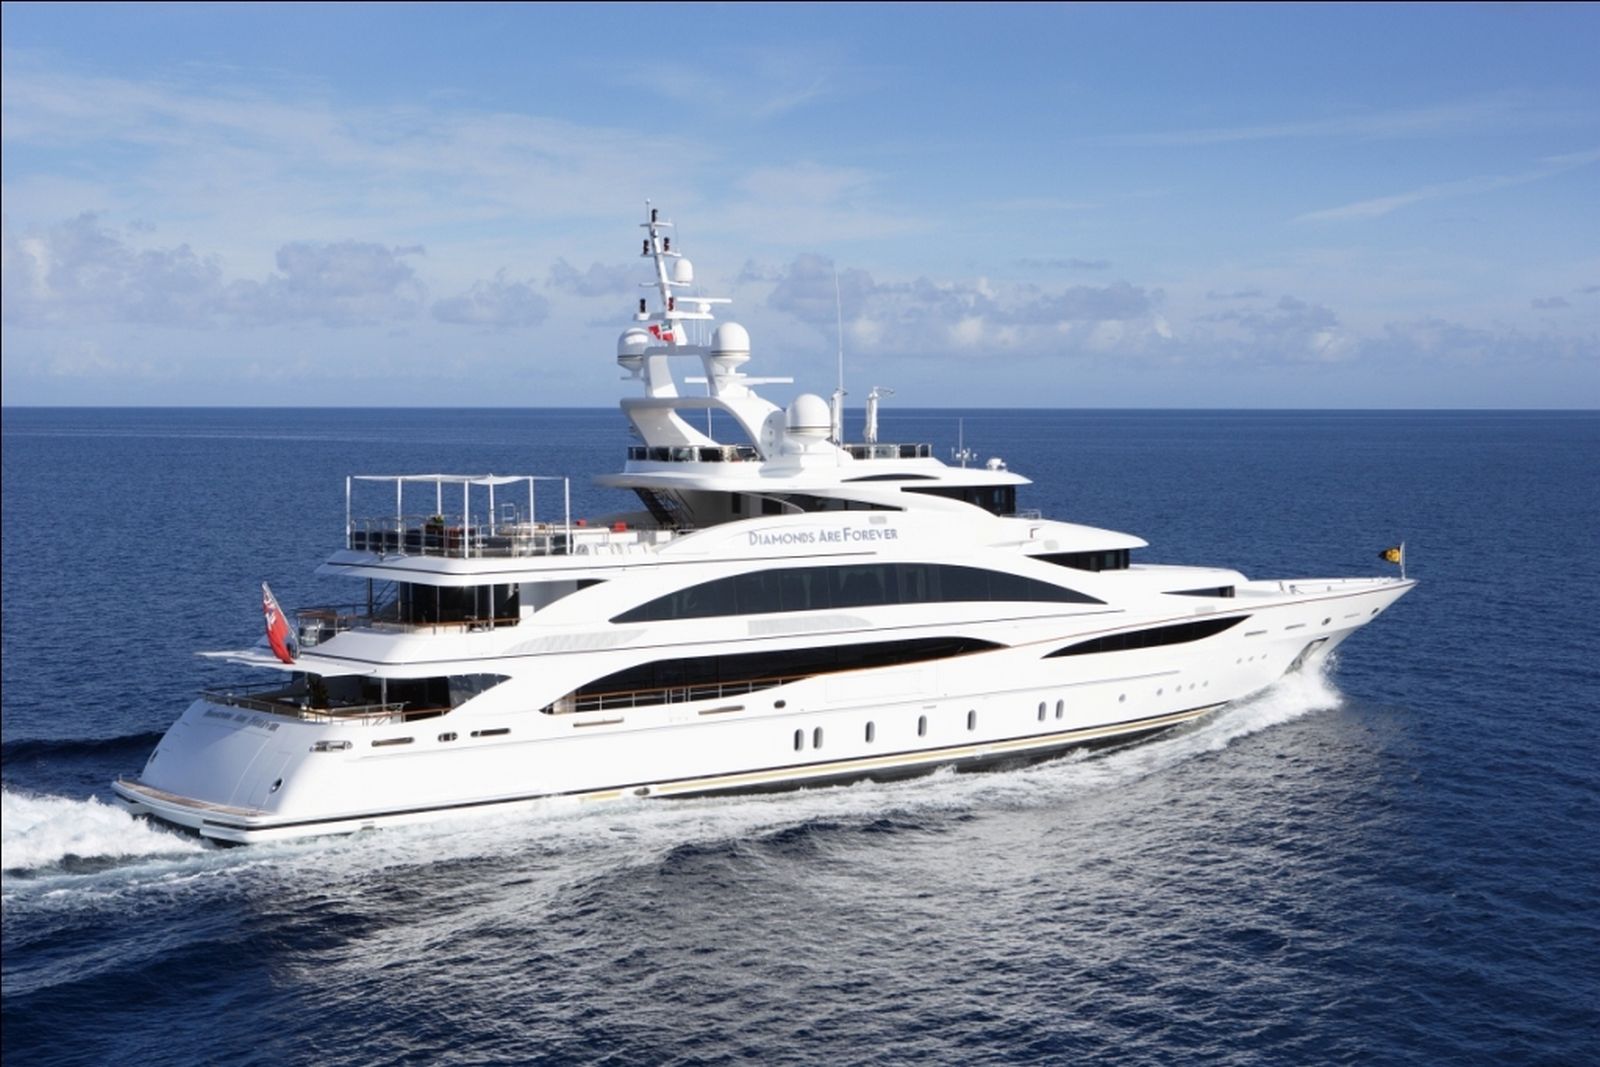 This Is What a $60 Million Yacht Looks Like - GTspirit